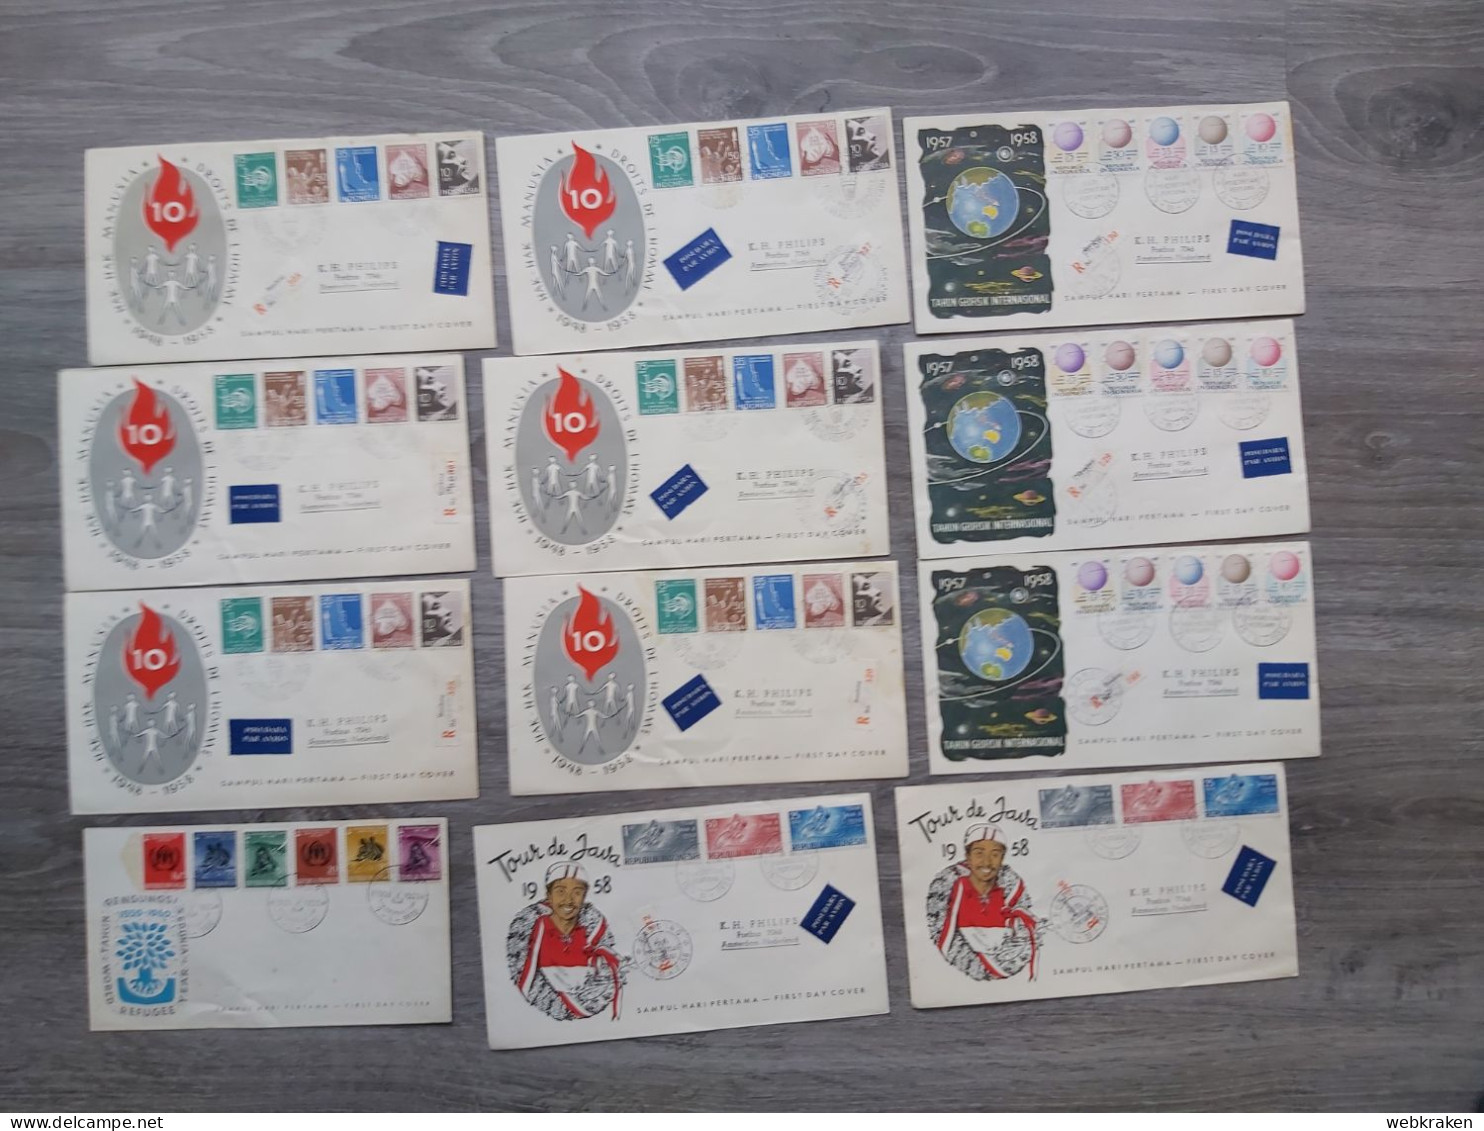 F.D.C. FDC FIRST DAY COVER LOT INDONESIA JAVA BANDUNG FOR STUDY - Indonesia